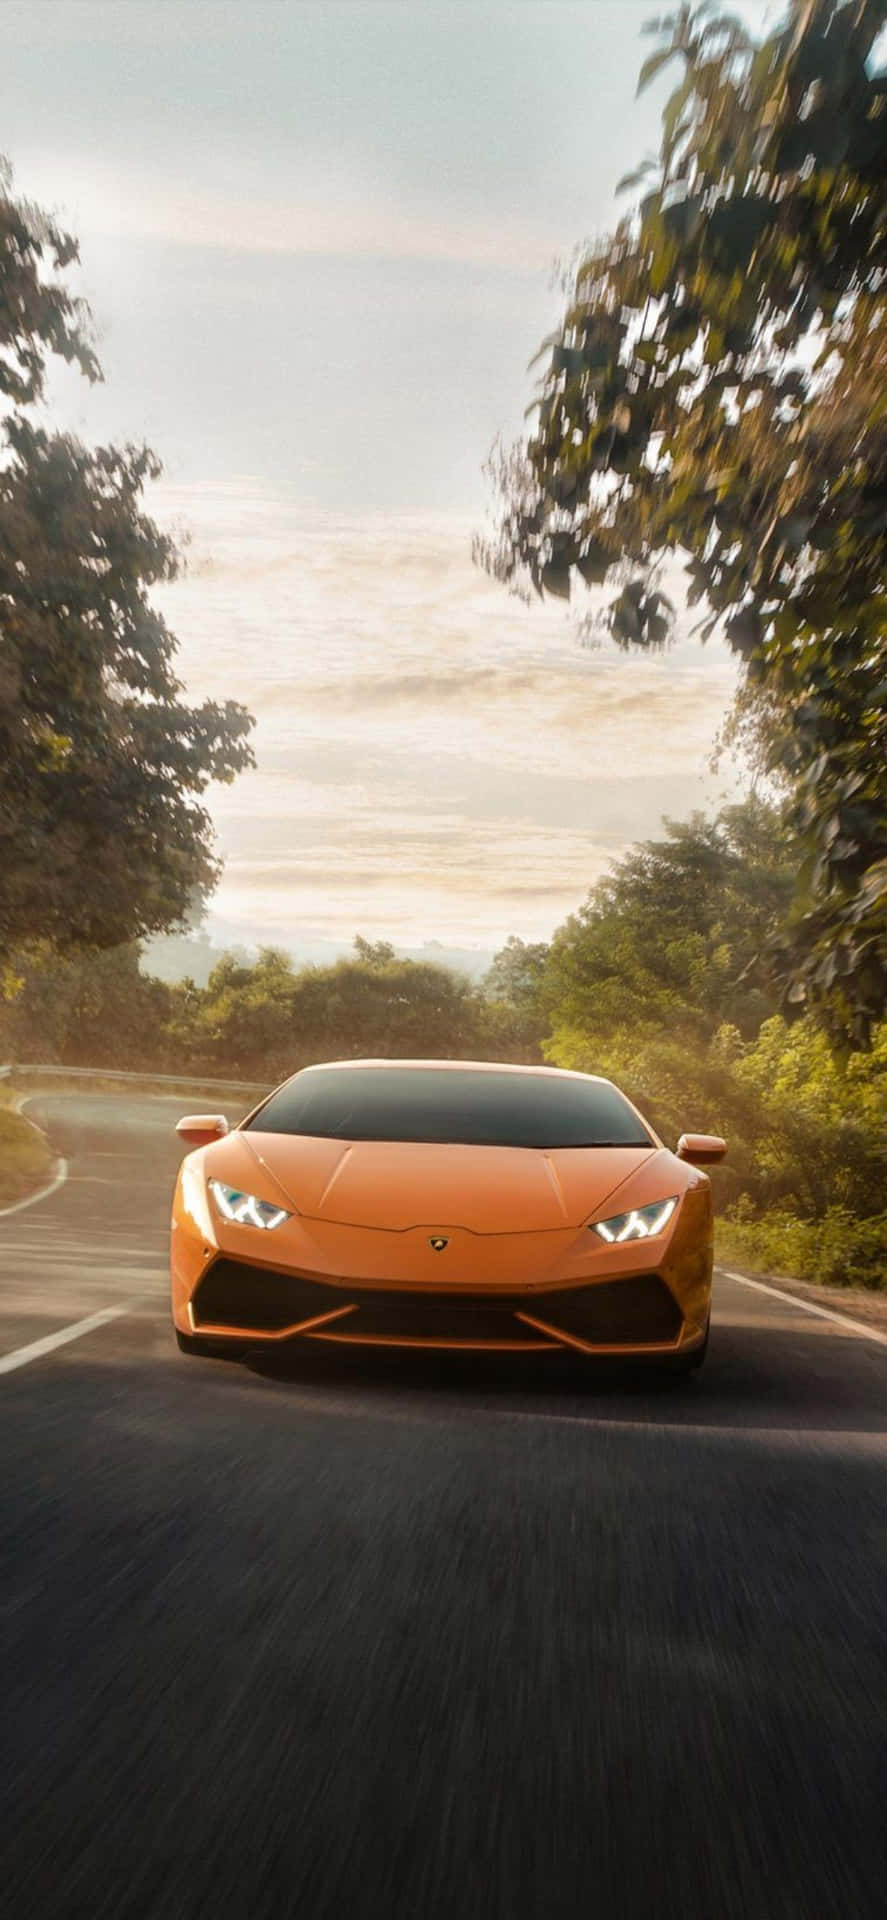 Get the latest Lamborghini with the new iPhone X.